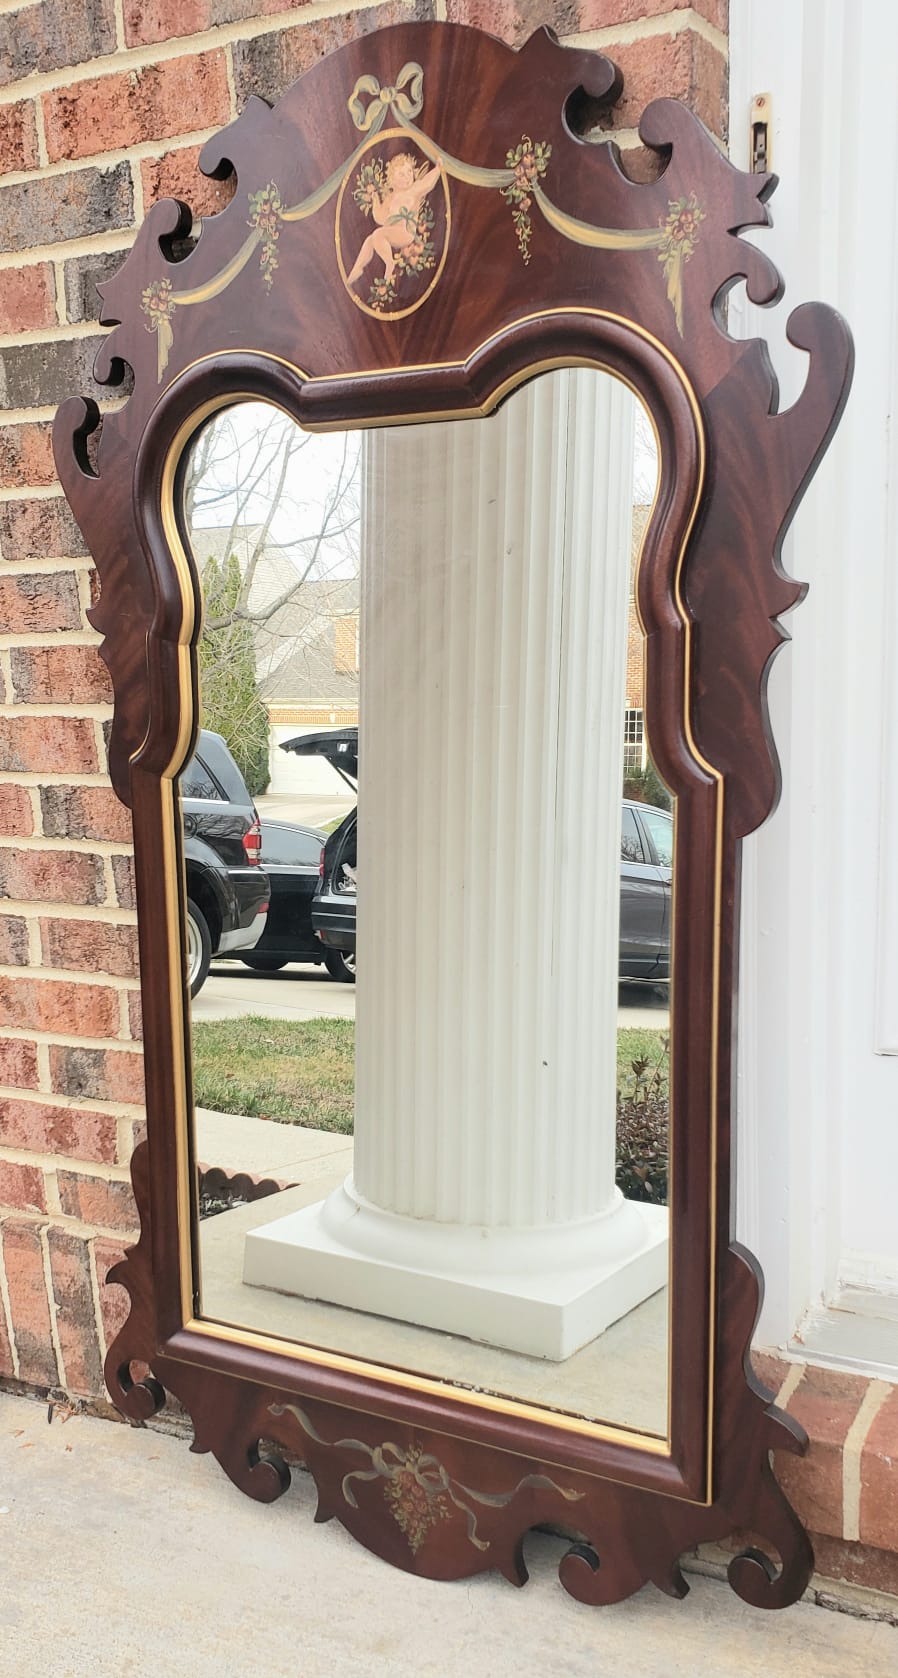 A beautiful George III Painted Mahogany wall Mirror in great vintage condition. Measures 28